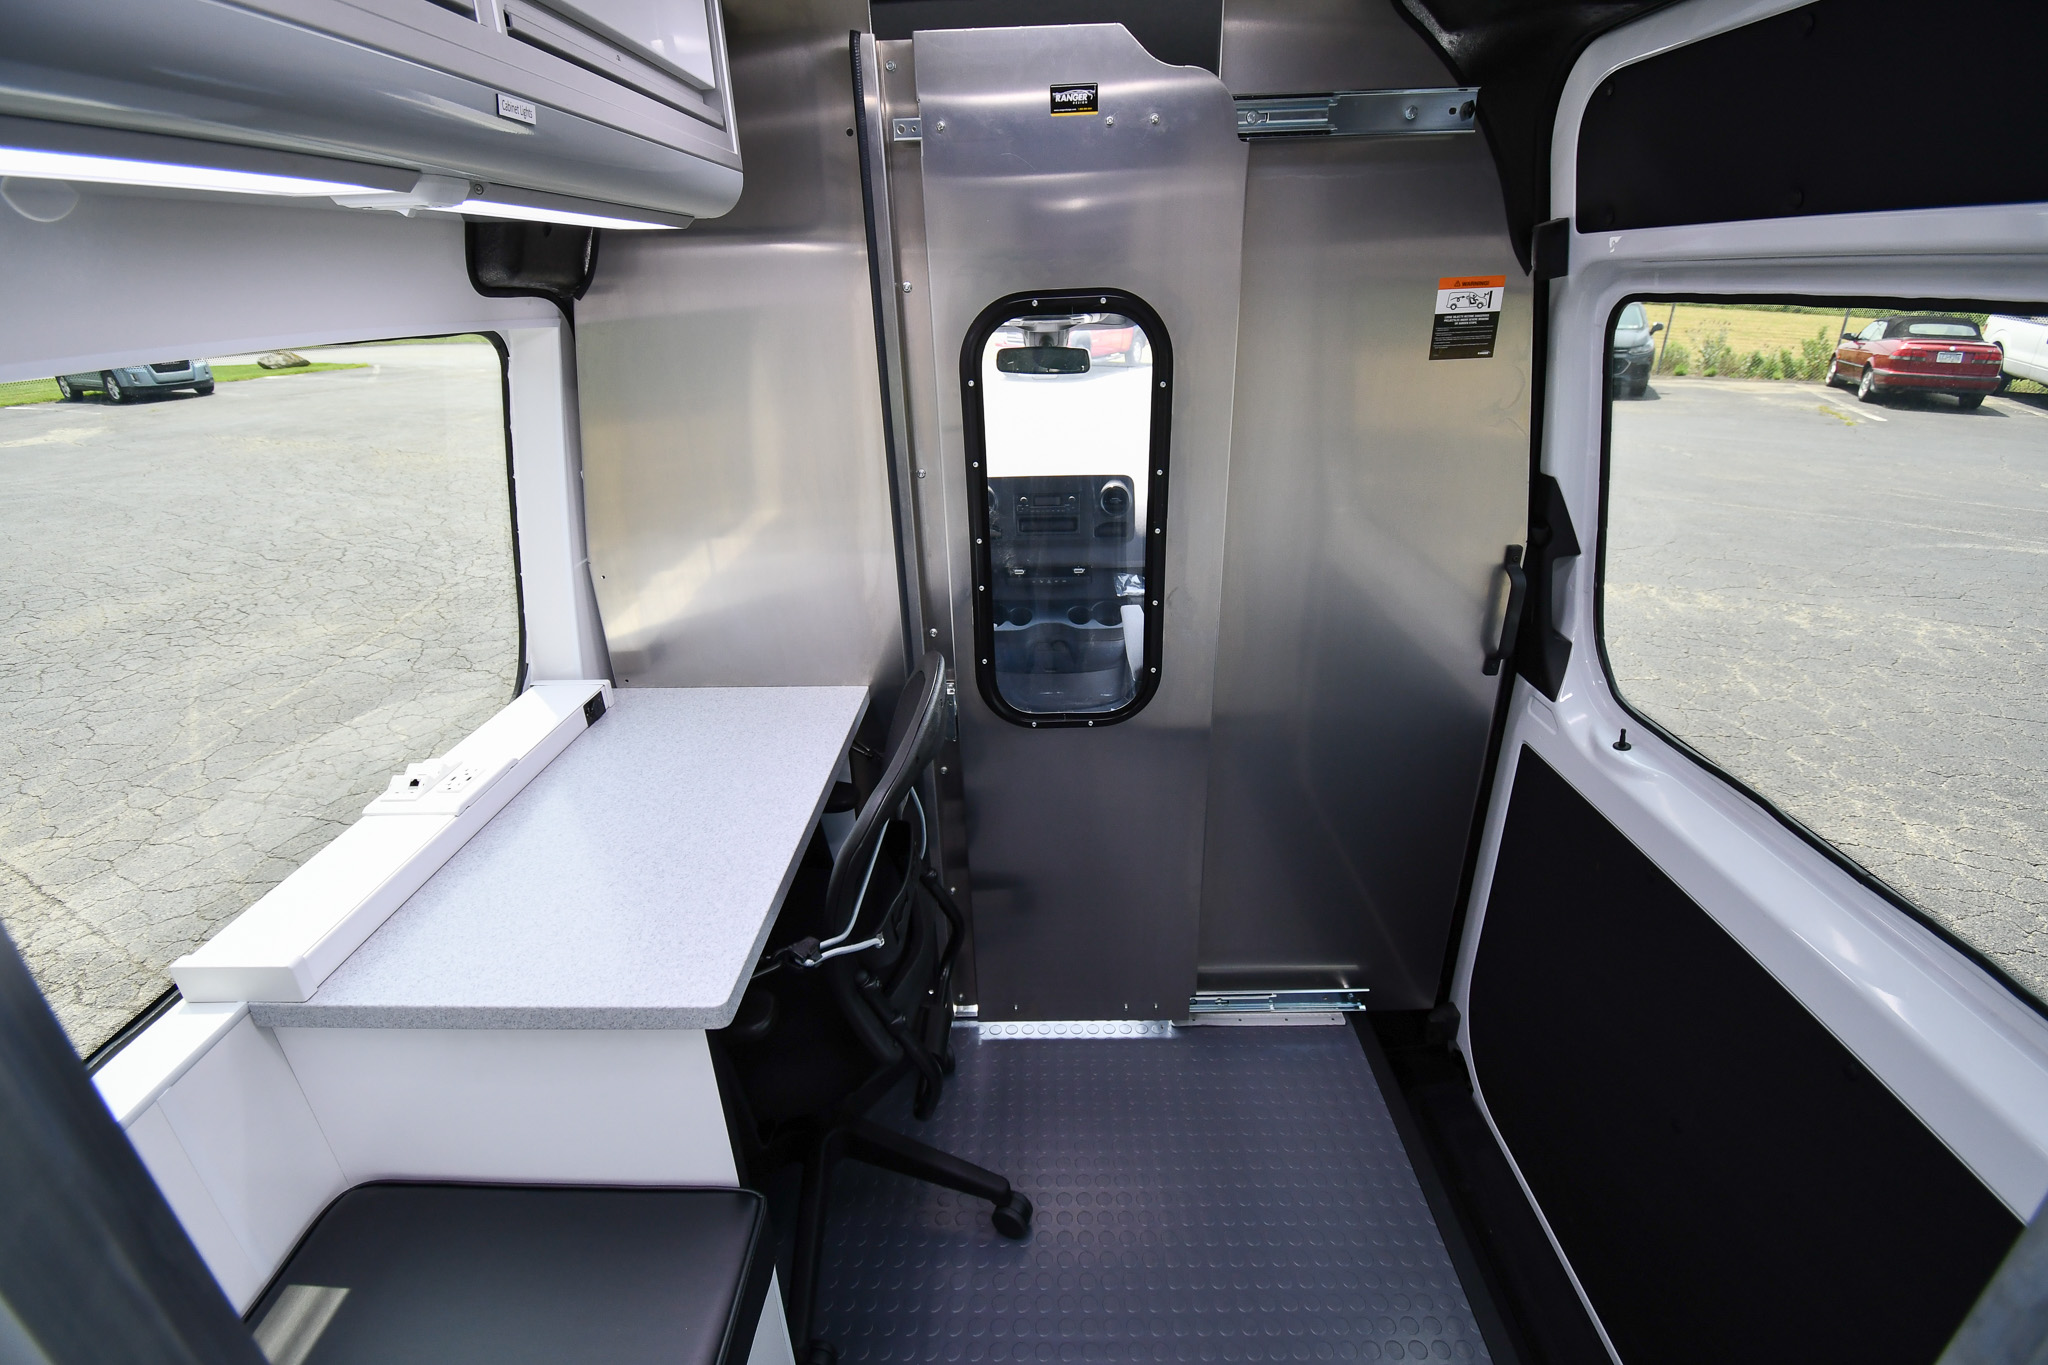 An interior view of the unit for Jackson Heights, NY.